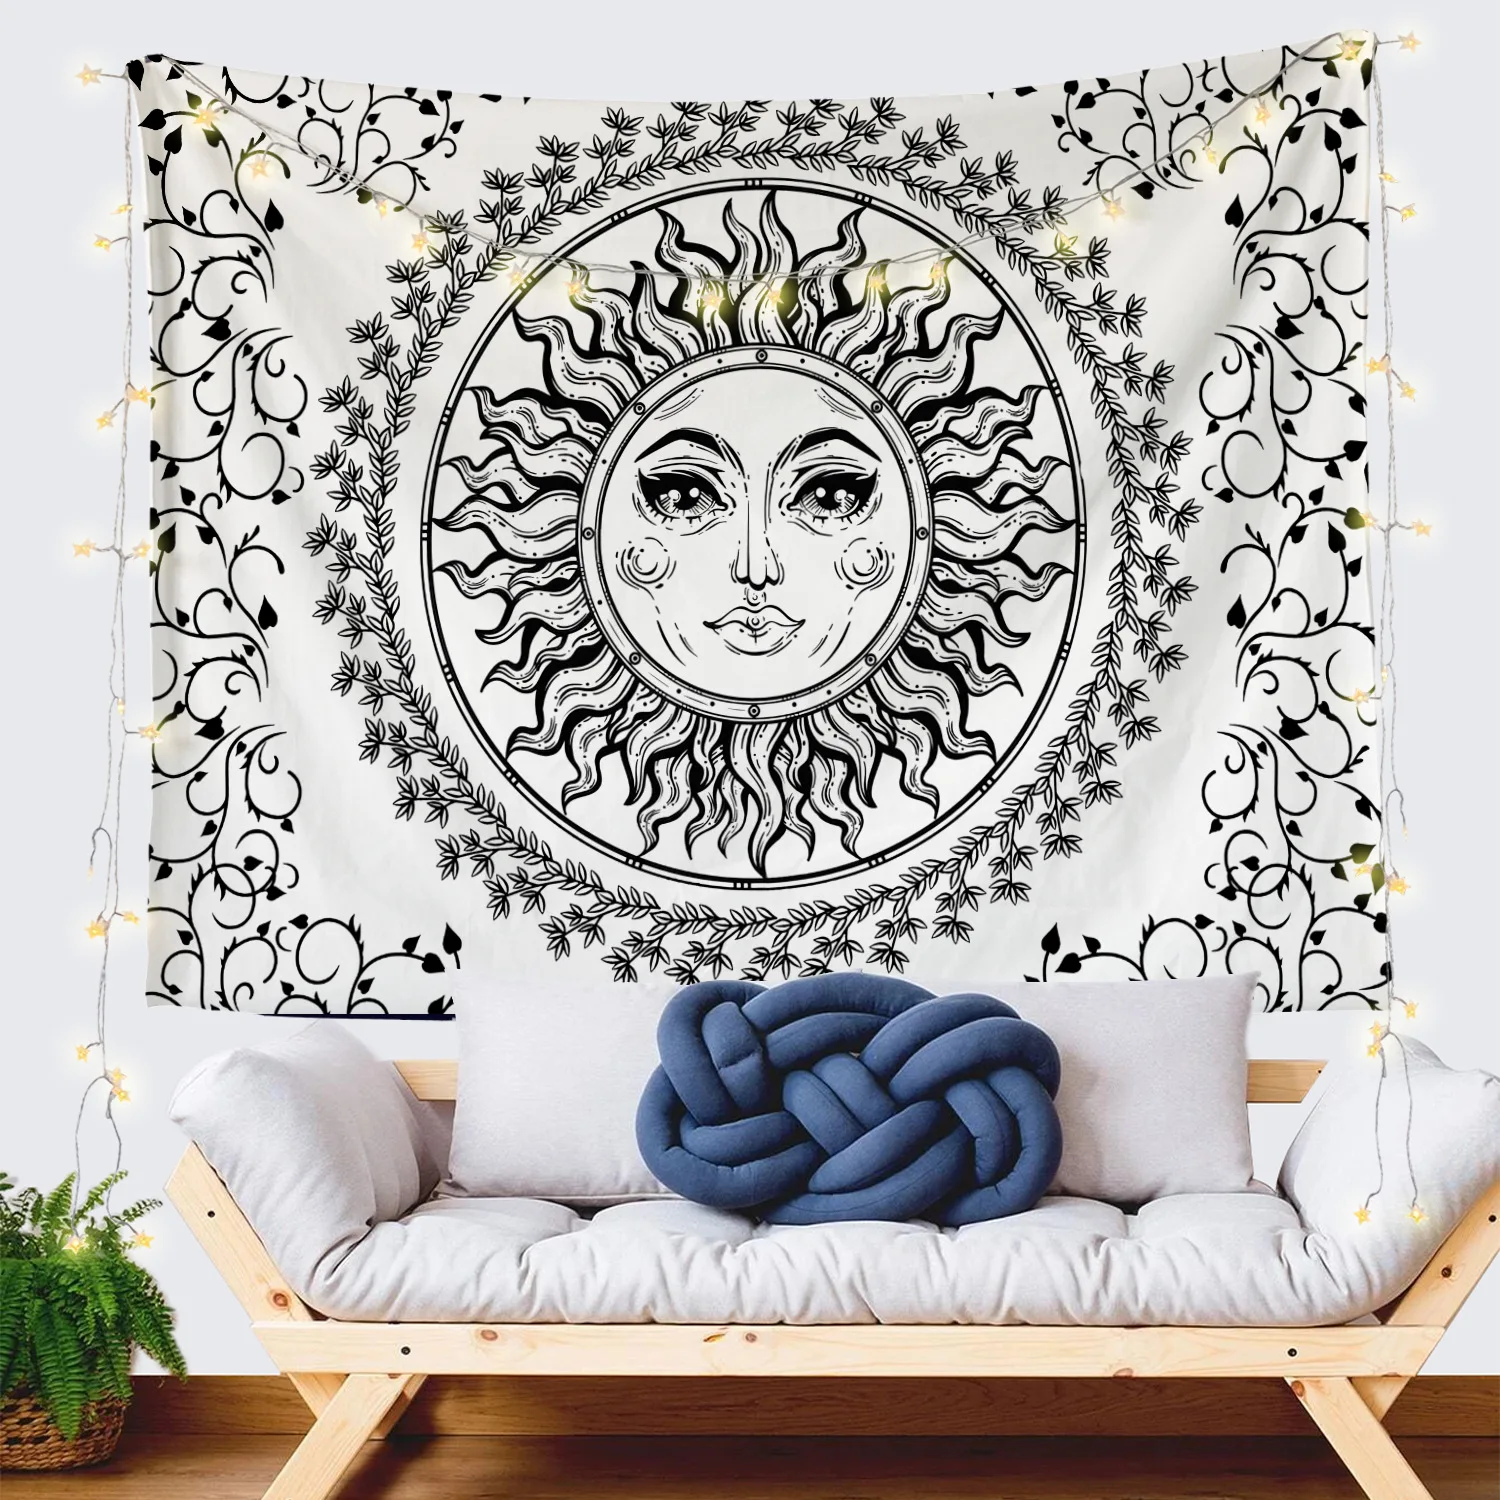 
Custom Tarot Tapestry Wall Hanging Astrology Divination Bedspread Matwitchcraft White Black Sun Moon Tapestry 